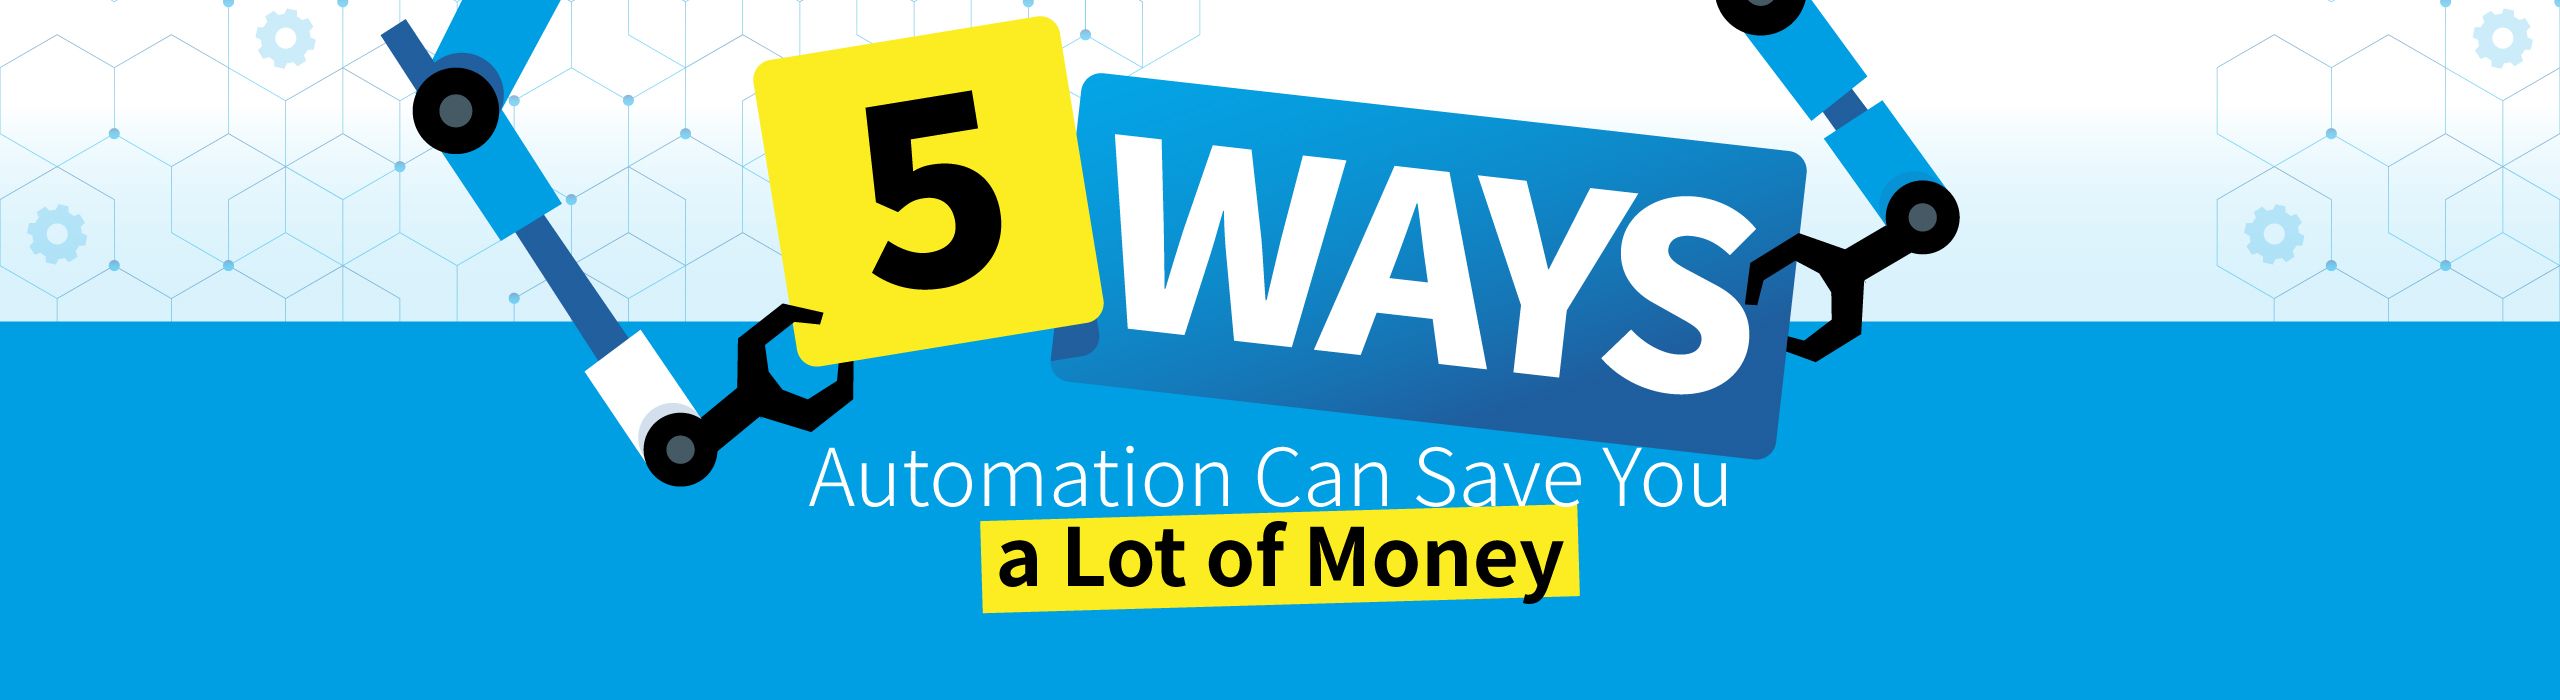 5 ways automation can save you a lot of money